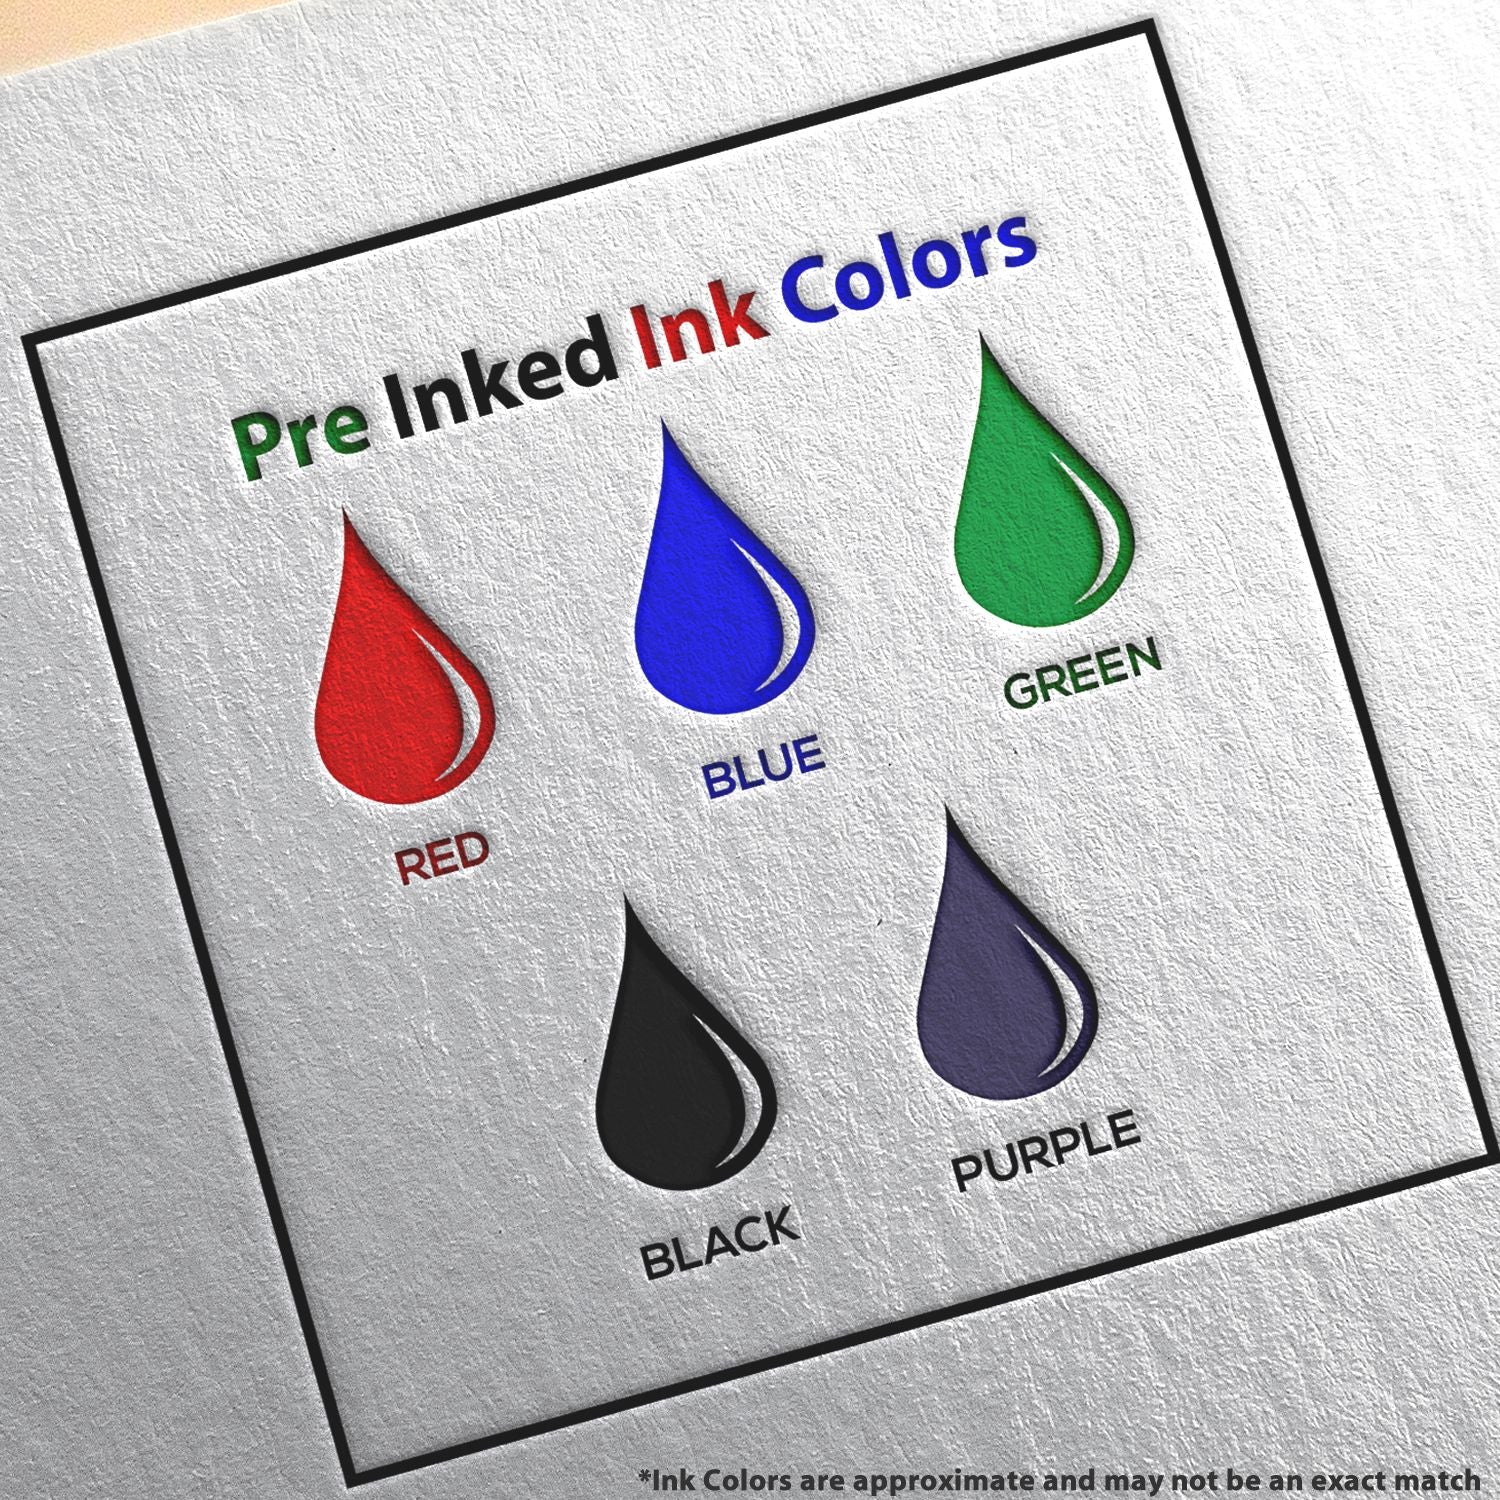 A picture showing the different ink colors or hues available for the Slim Pre-Inked Arkansas Architect Seal Stamp product.